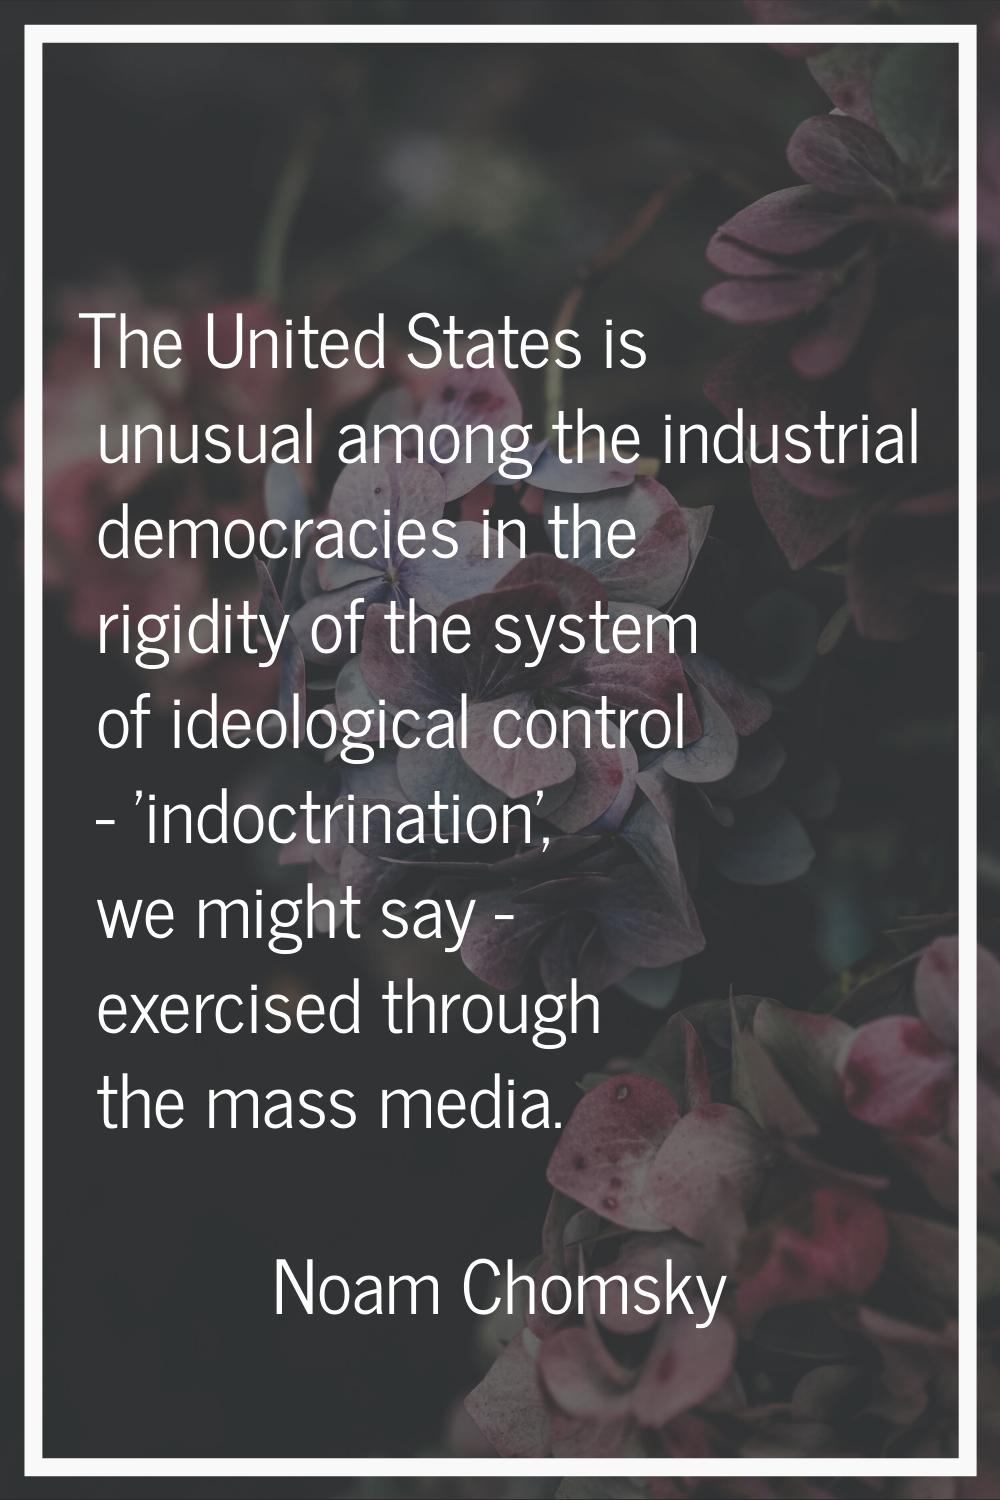 The United States is unusual among the industrial democracies in the rigidity of the system of ideo